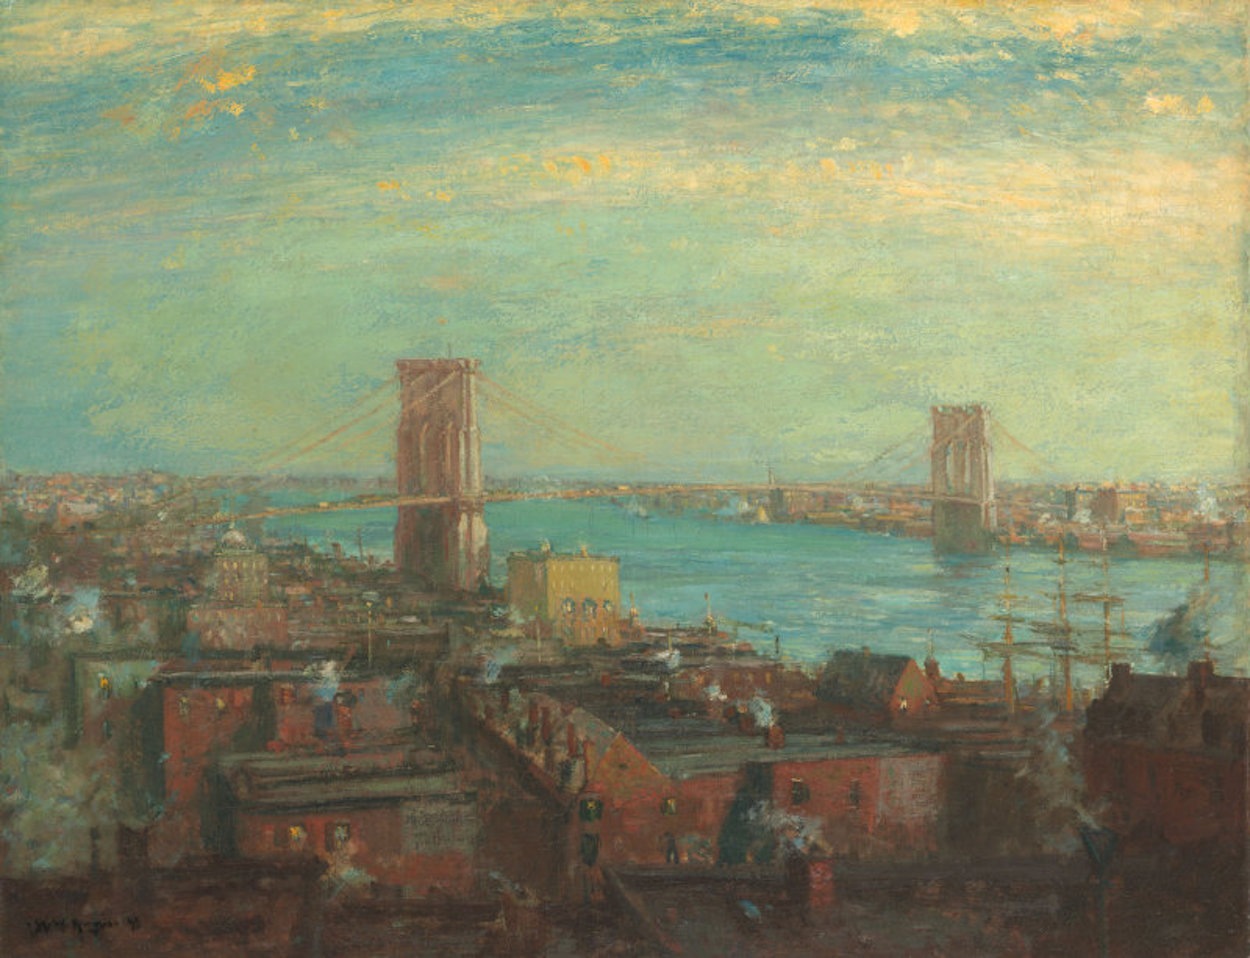 Il ponte di Brooklyn by Henry Ward Ranger - 1899 - 72,39 x 91,75 cm Art Institute of Chicago